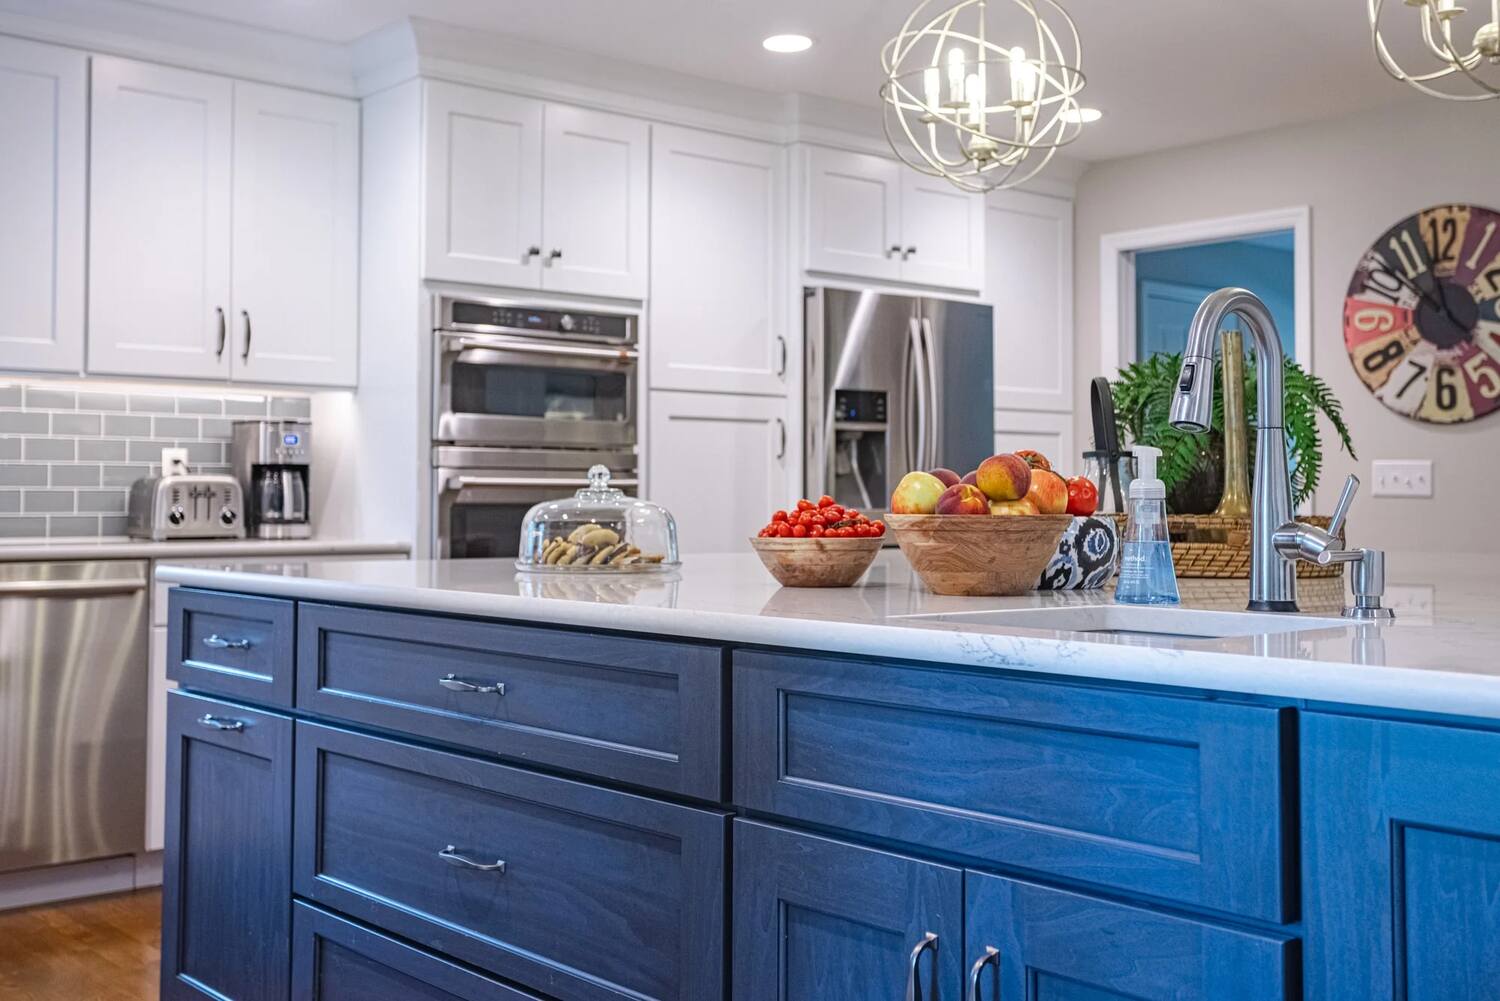 Navy blue kitchen island with white countertop and sink